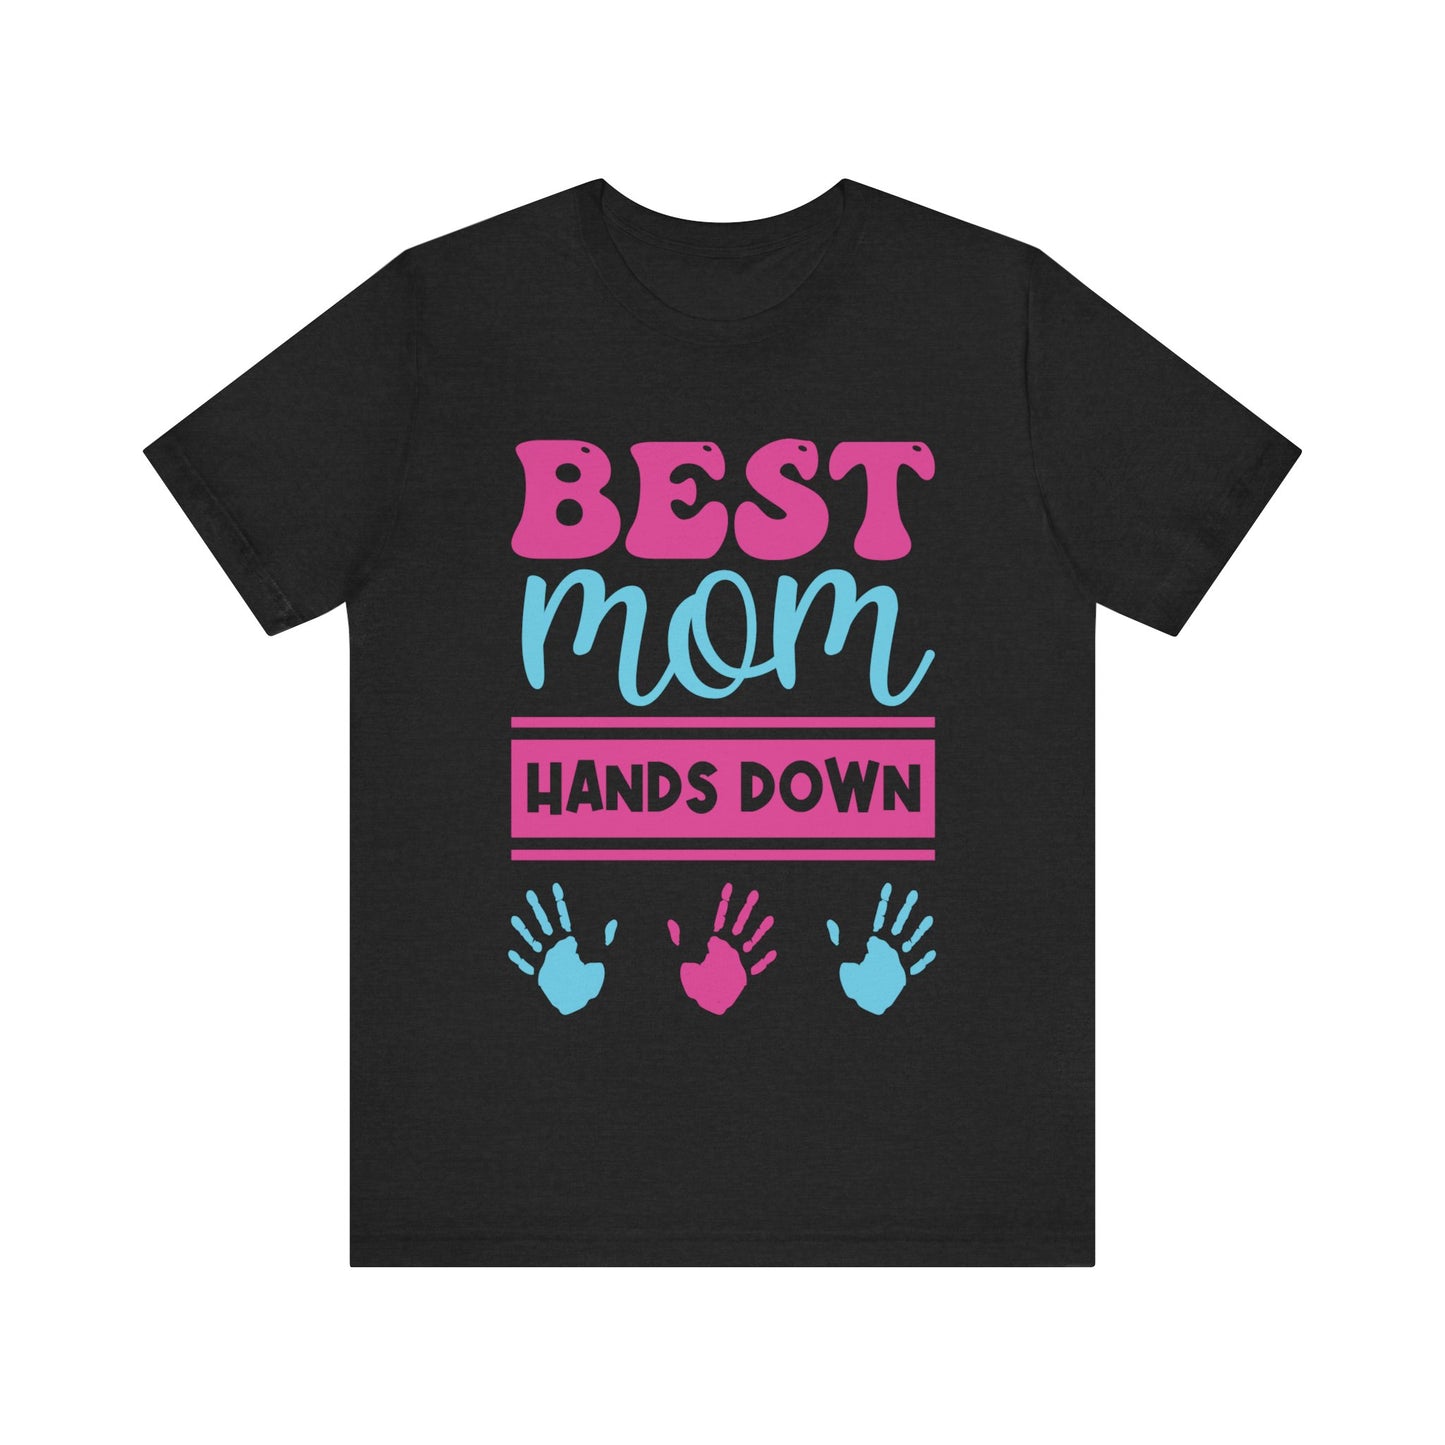 Best Mom Hands Down Shirt - Perfect Mother's Day Gift, Loving Mom Tee, Casual Mom Apparel, Unique Gift for Mom, Women's Graphic T-Shirt